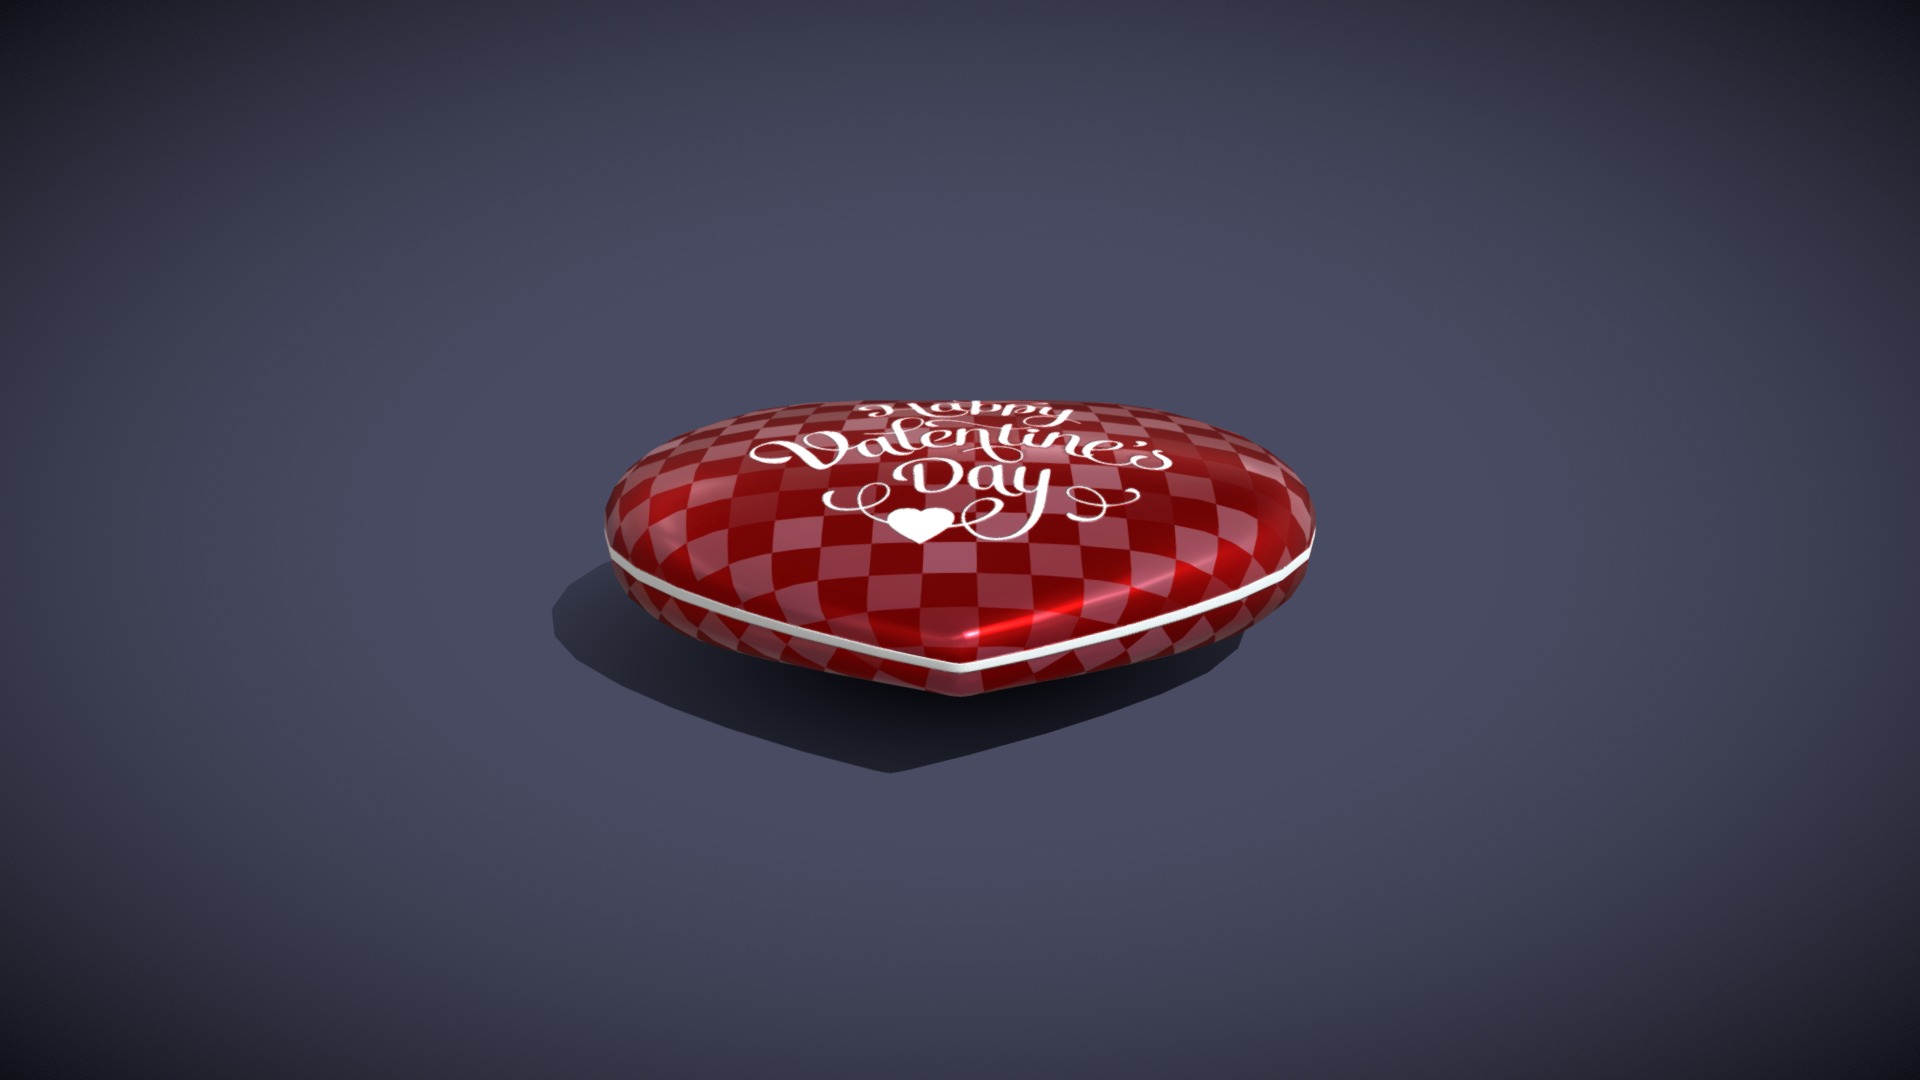 3D model Heart Shaped Box 3D Model - This is a 3D model of the Heart Shaped Box 3D Model. The 3D model is about a red and white logo.